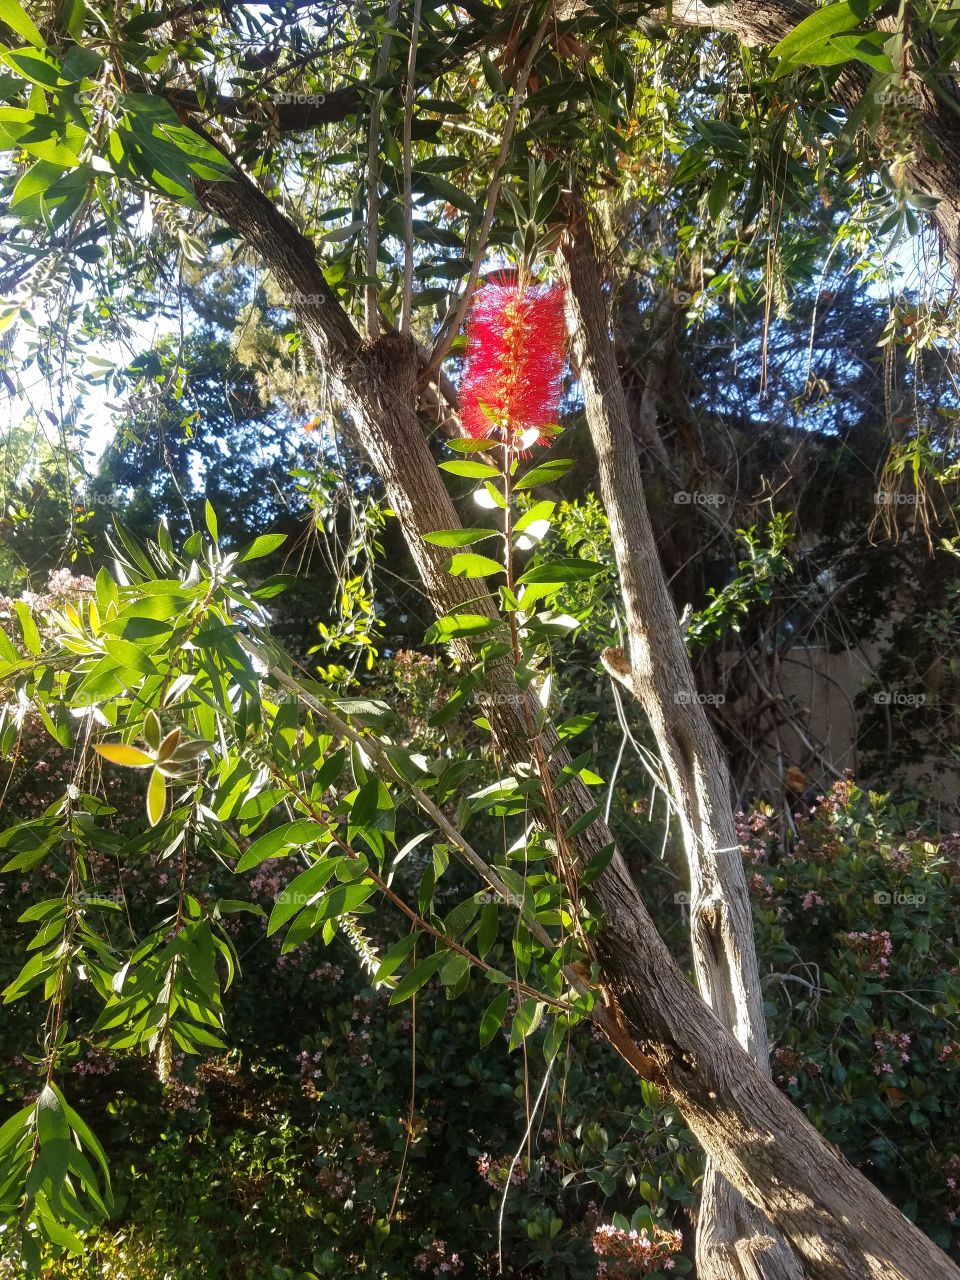 In a sea of green and brown plants and trees, one very red bottle brush plant stands out.